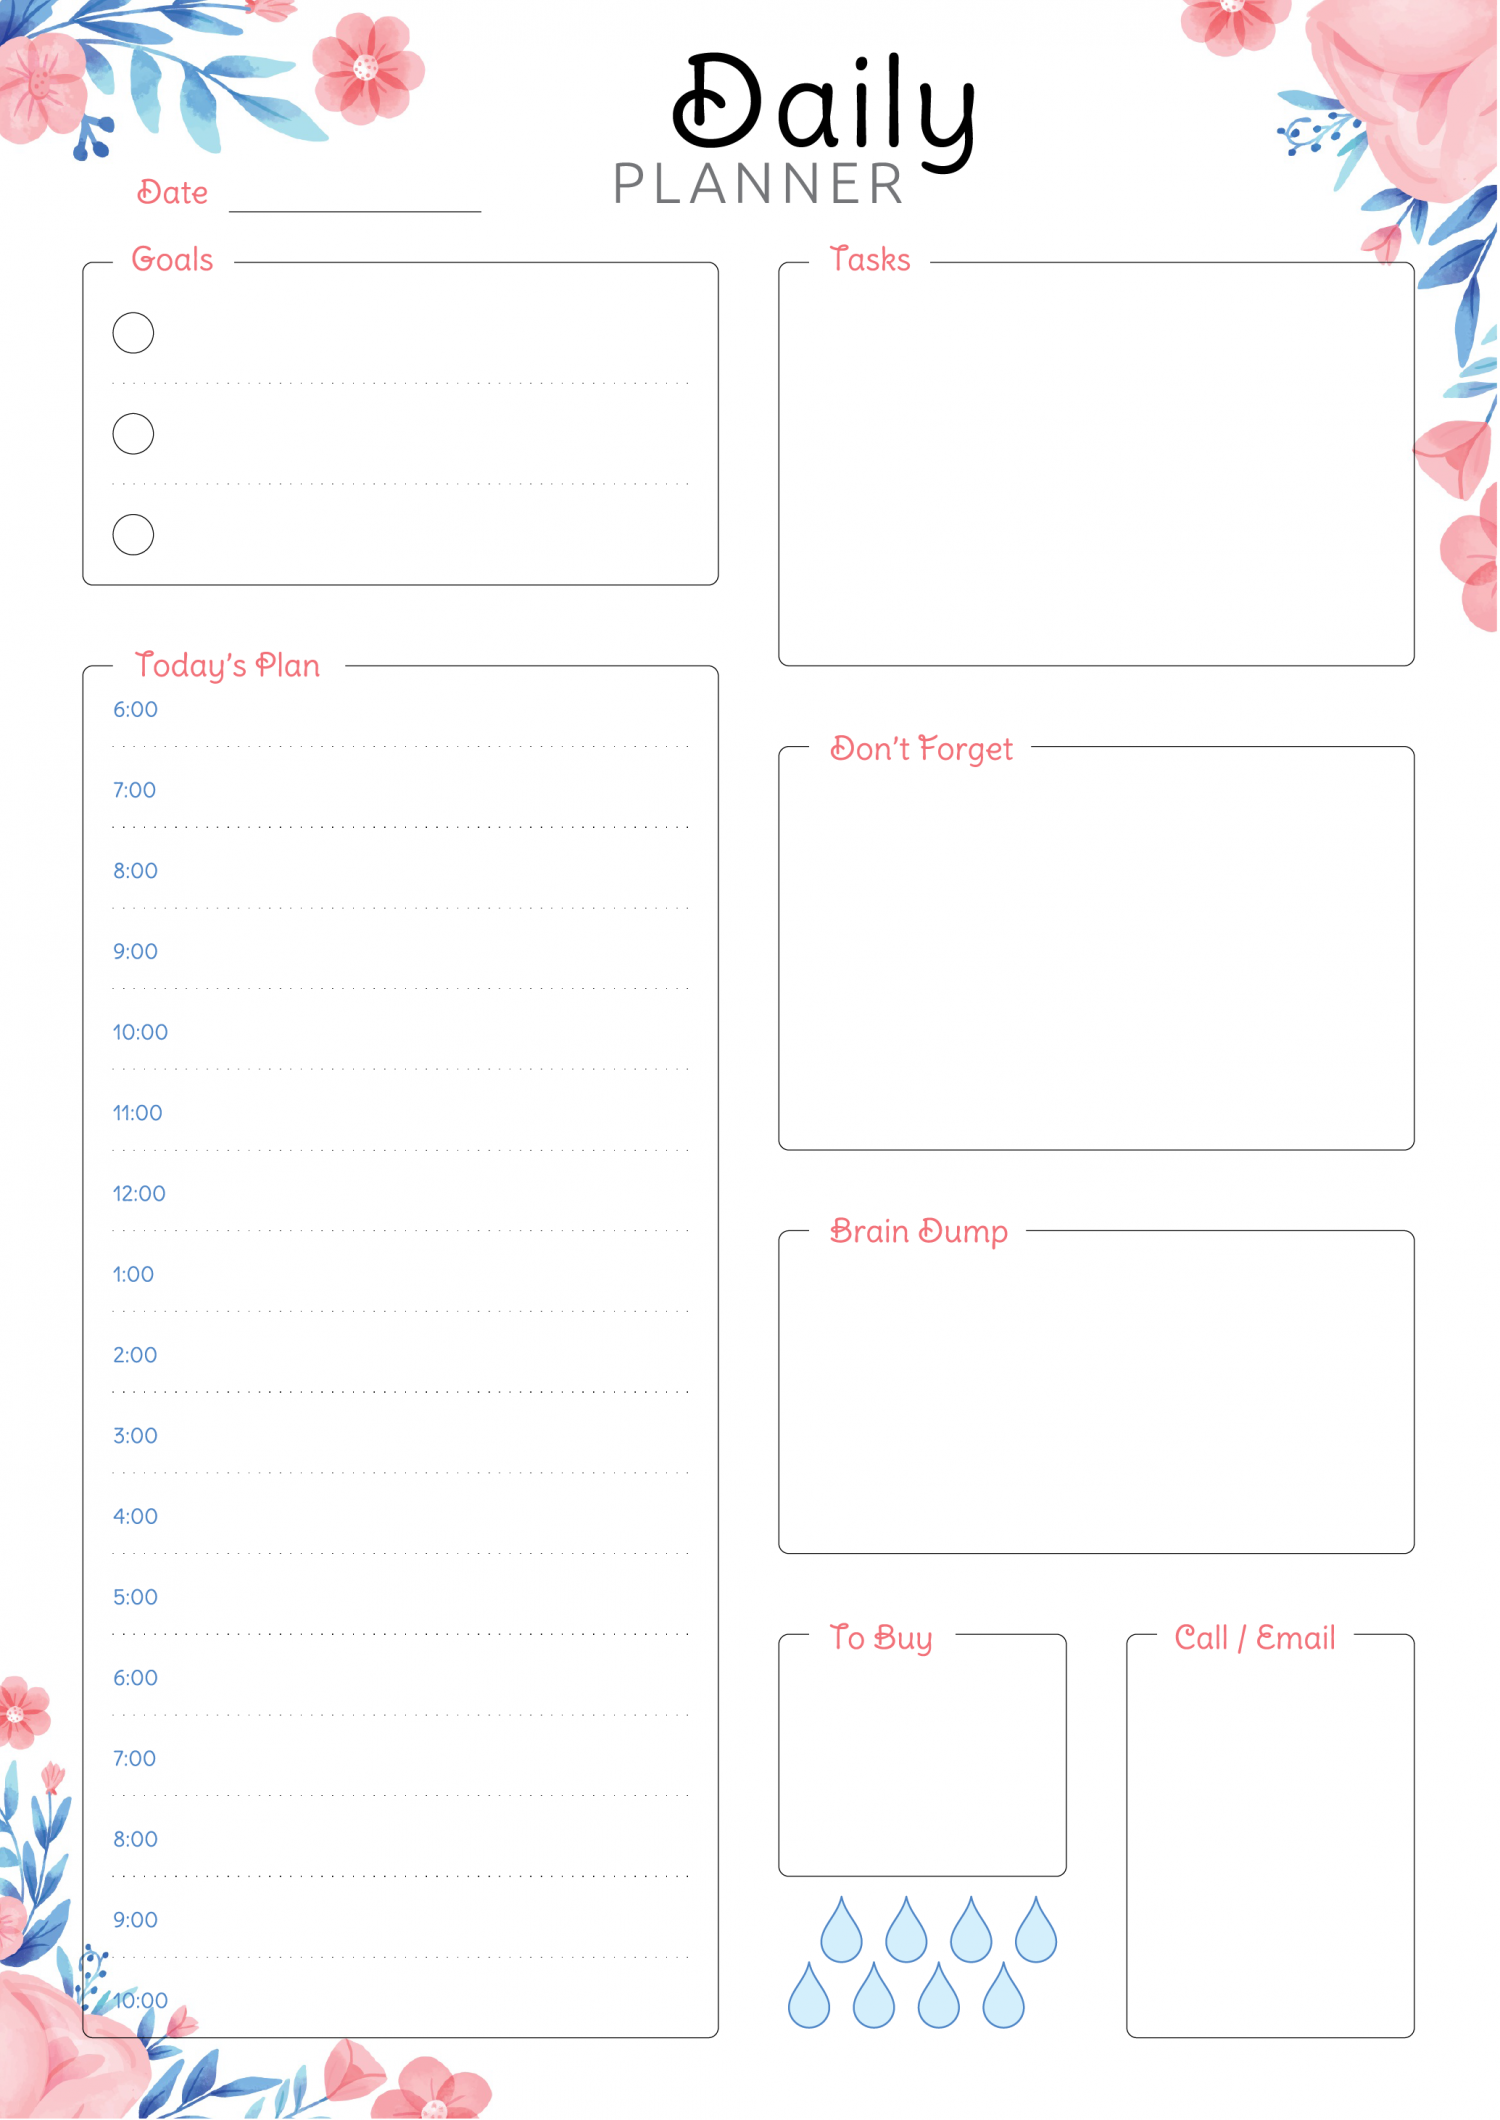 Free Printable Hourly Planner With Daily Tasks Goals PDF Download